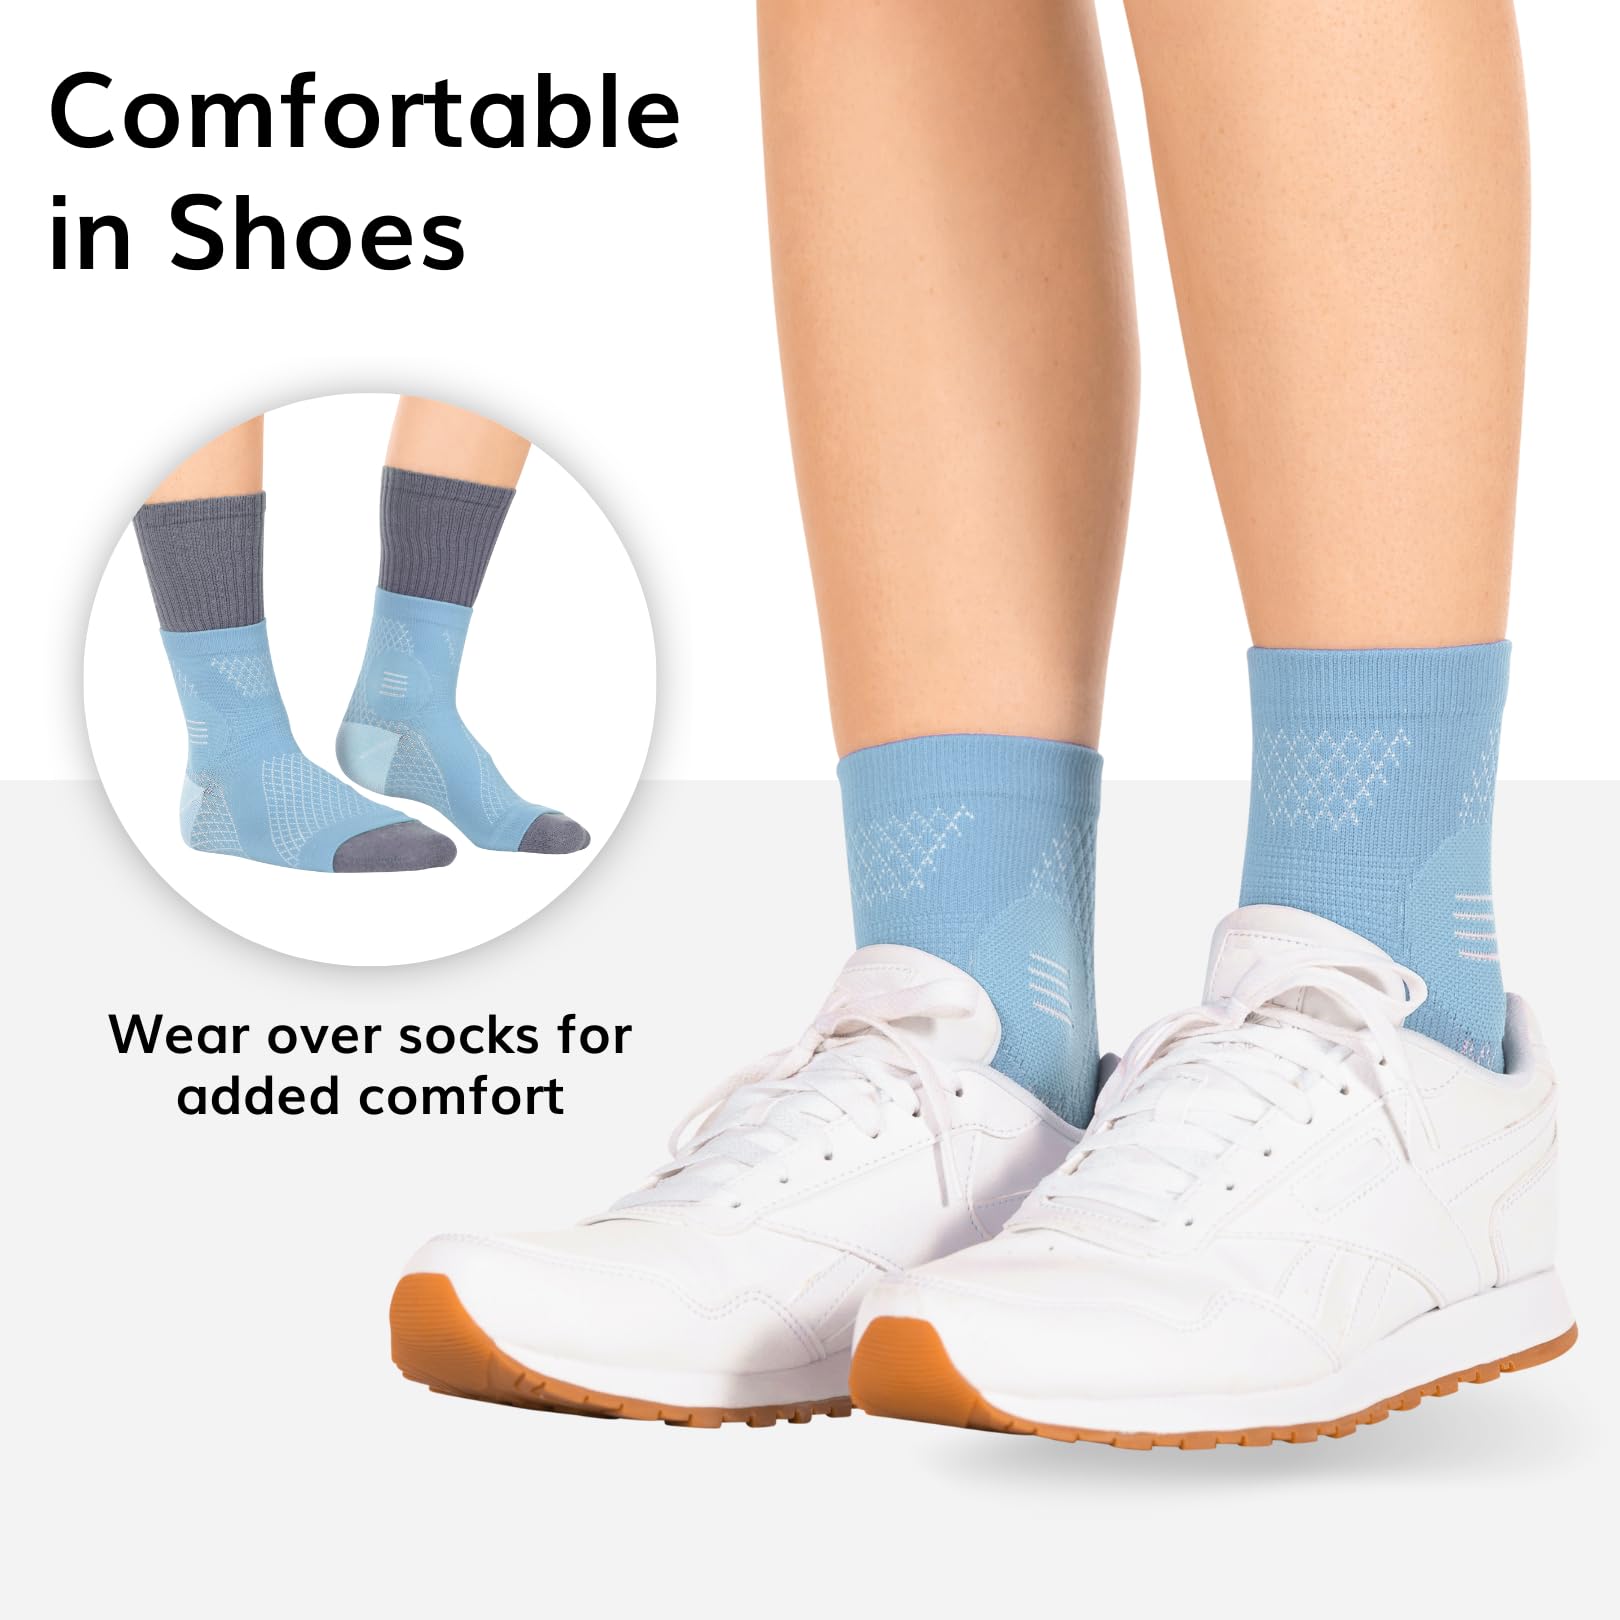 BraceAbility Neuropathy Socks - Peripheral Neuritis Compression Diabetic Toeless Foot Sleeves for Nerve Damage in Feet, Ankle Gout, Plantar Fasciitis Relief for Men and Women (L - Light Blue)